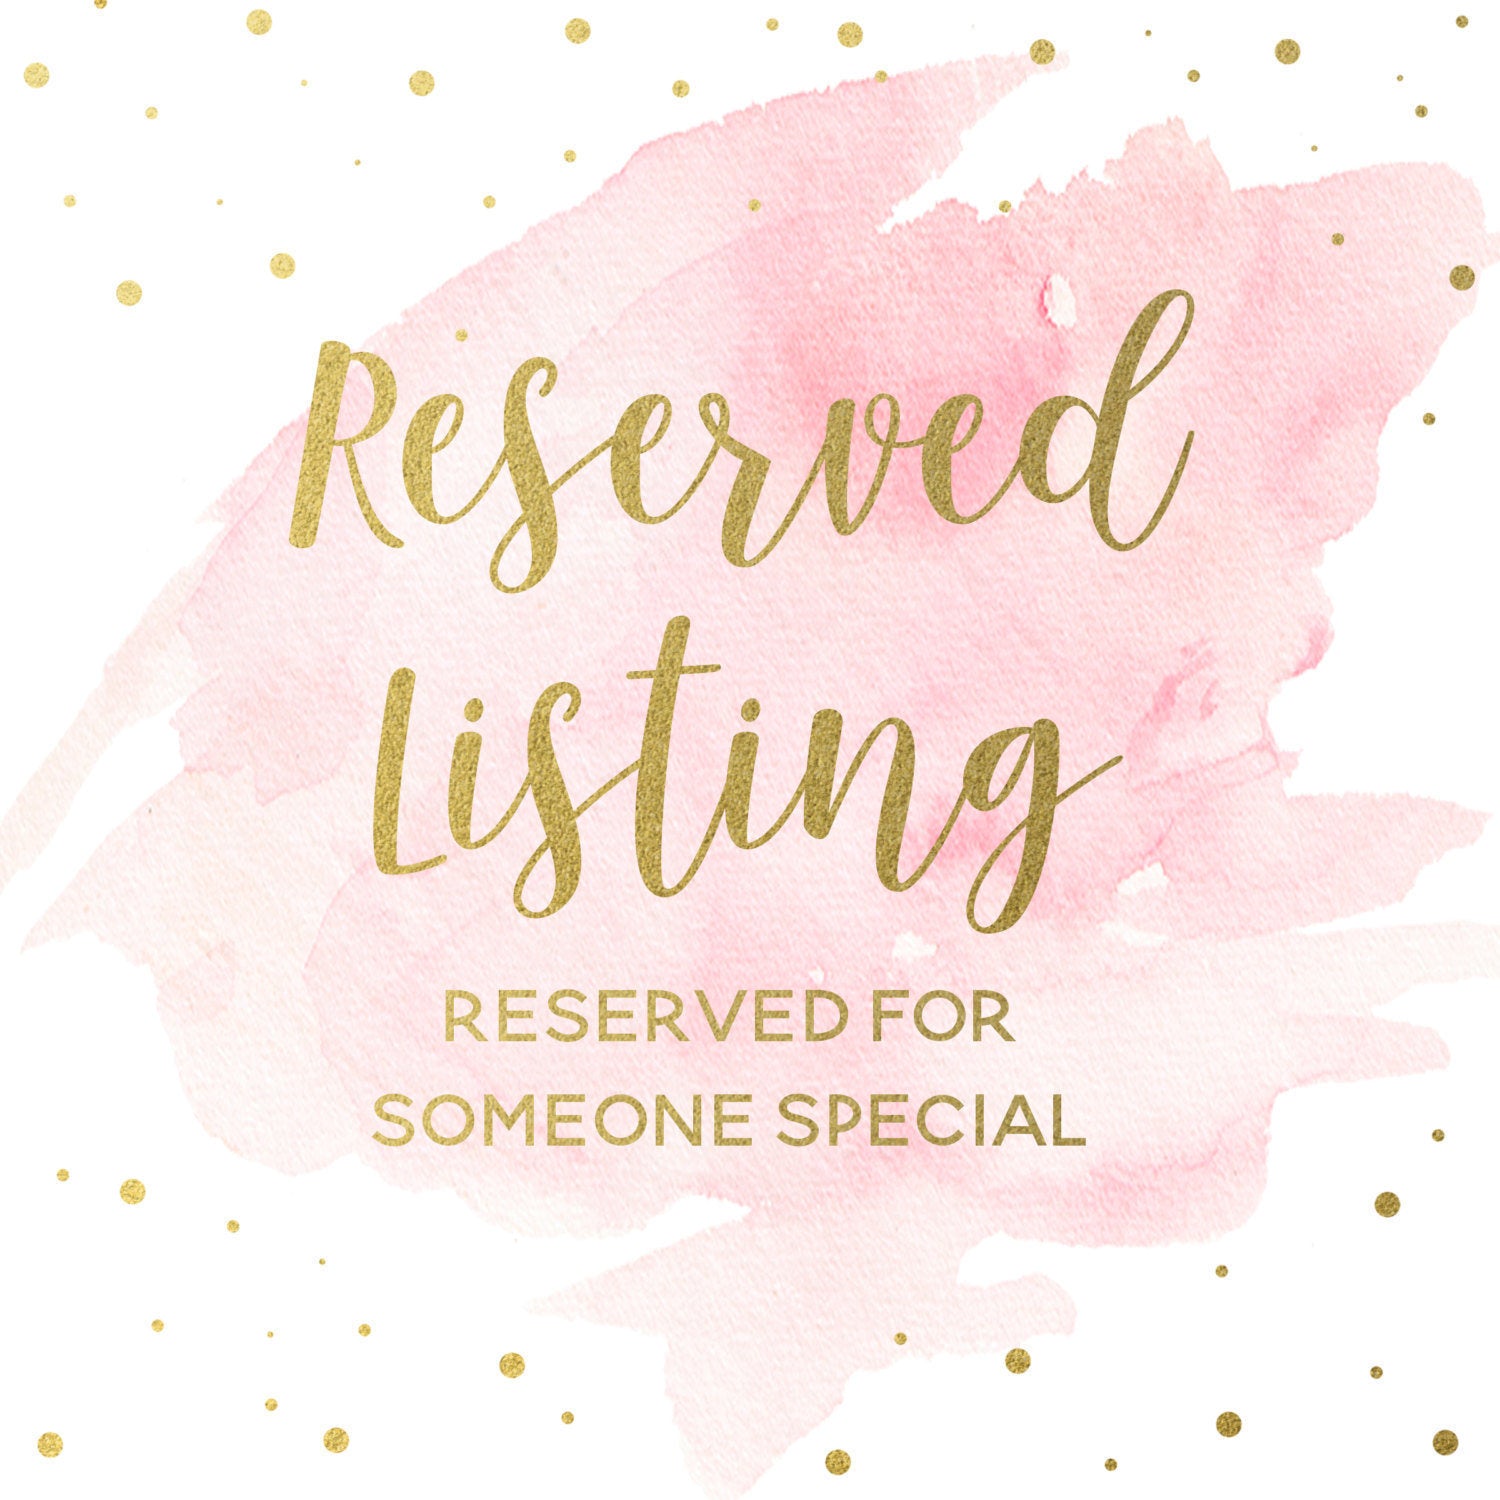 Reserved Listing - Jeanne C.